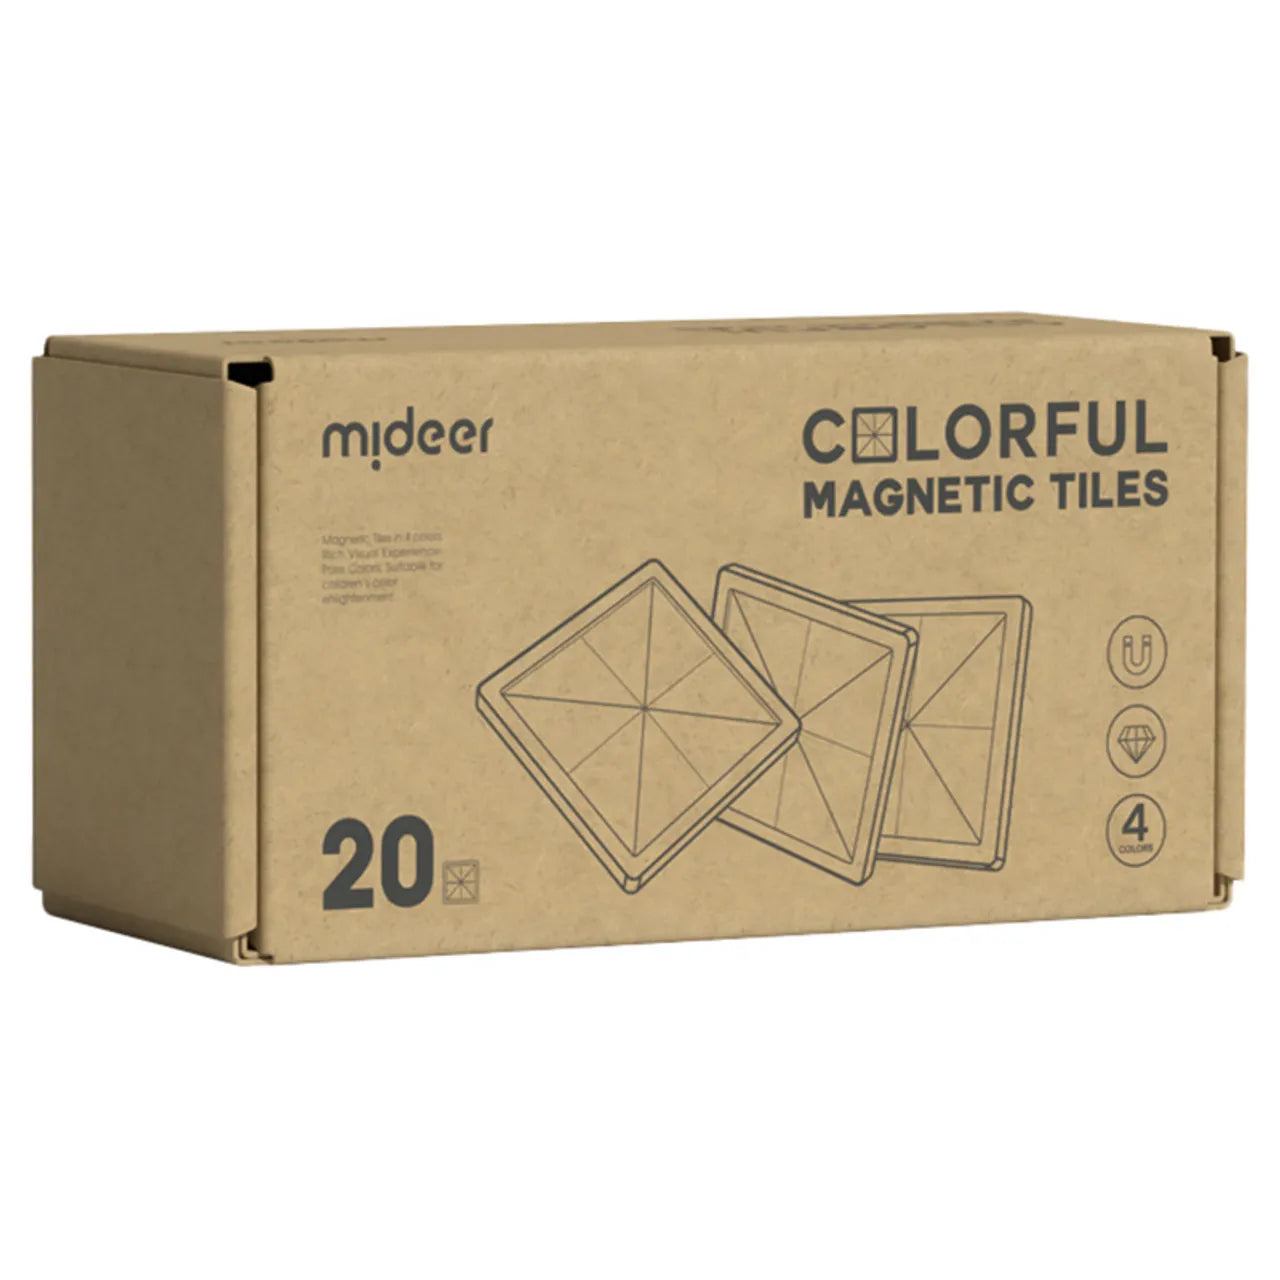 Mideer Colorful Magnetic Tiles 20pcs - Cold